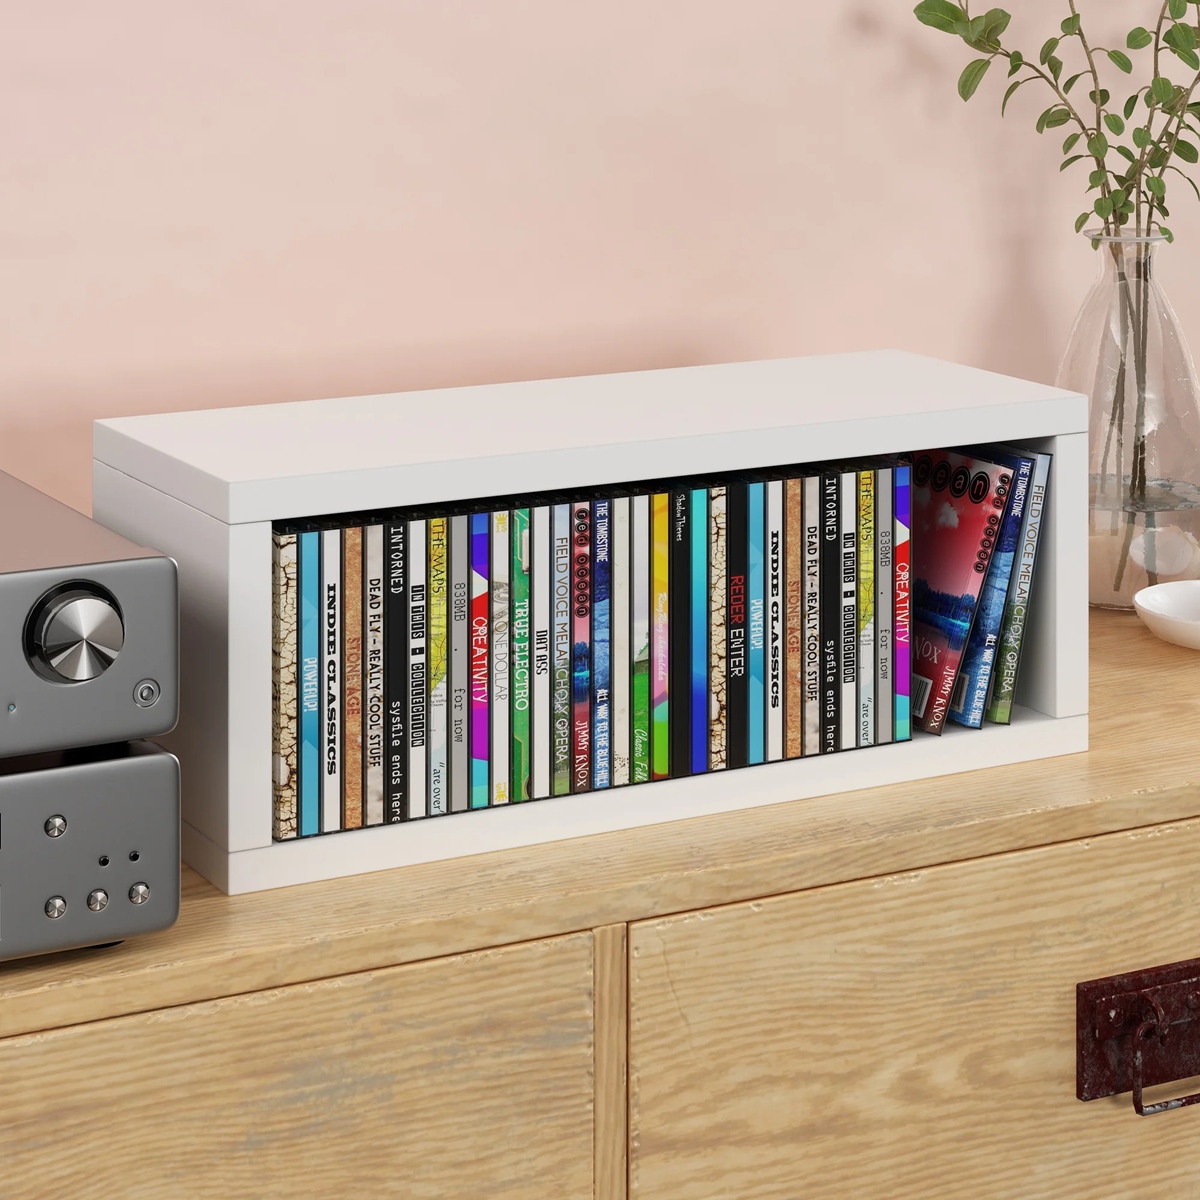 Where To Find A CD Storage Rack